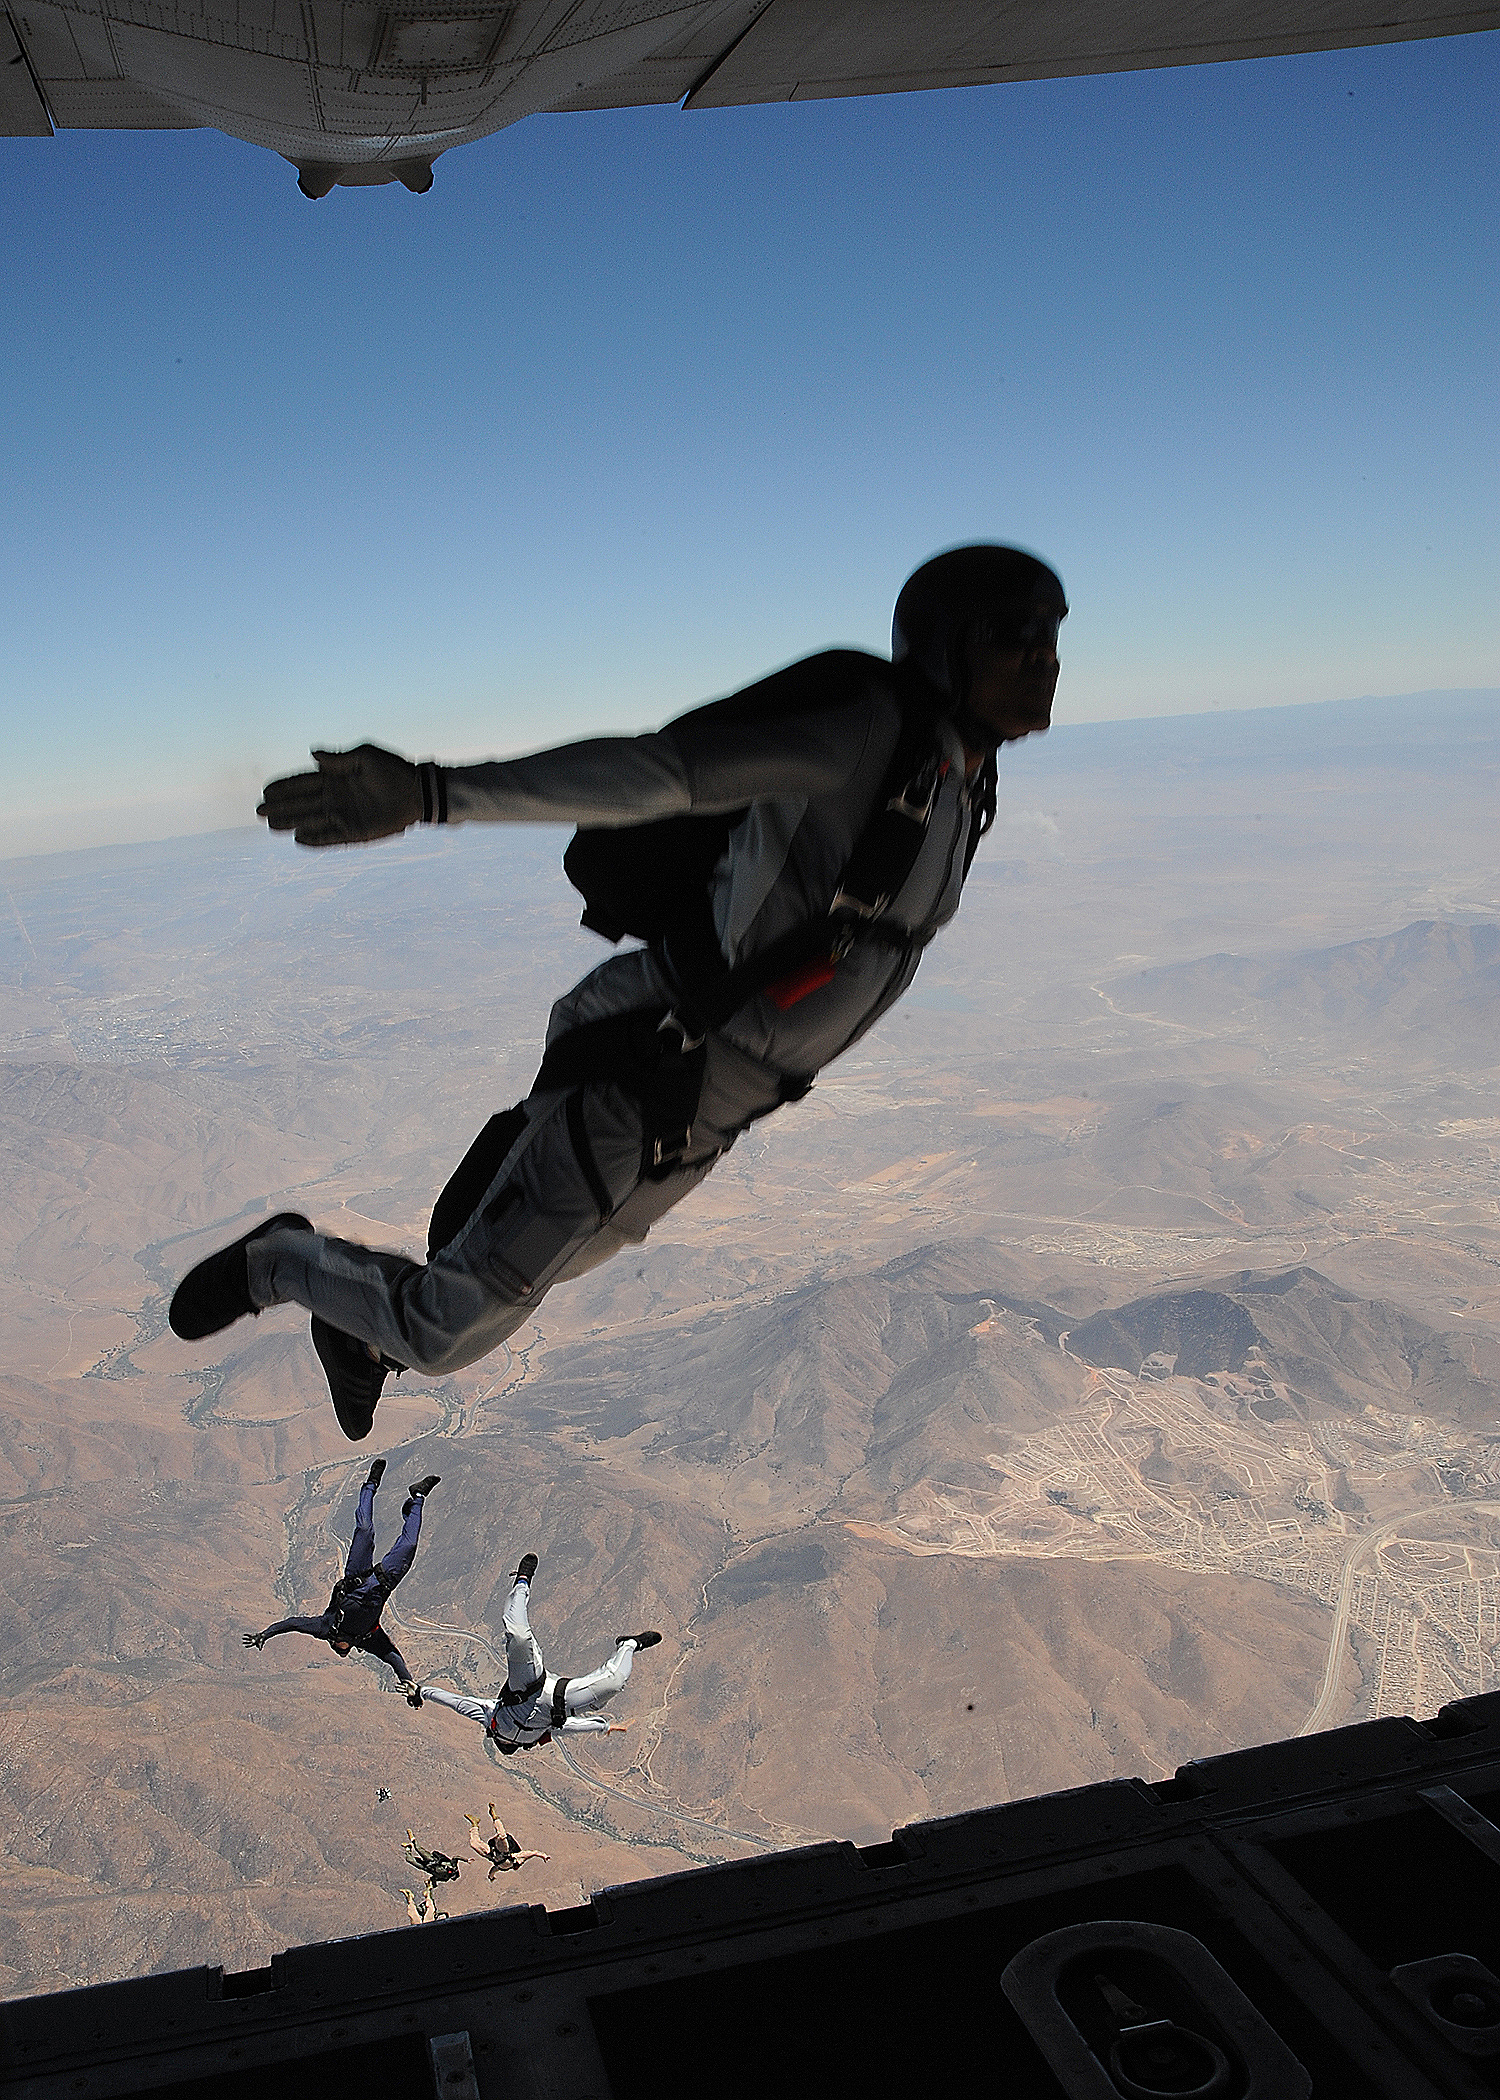 File:US Navy 080722-N-5366K-347 Freefall parachute jumpers leap from ...